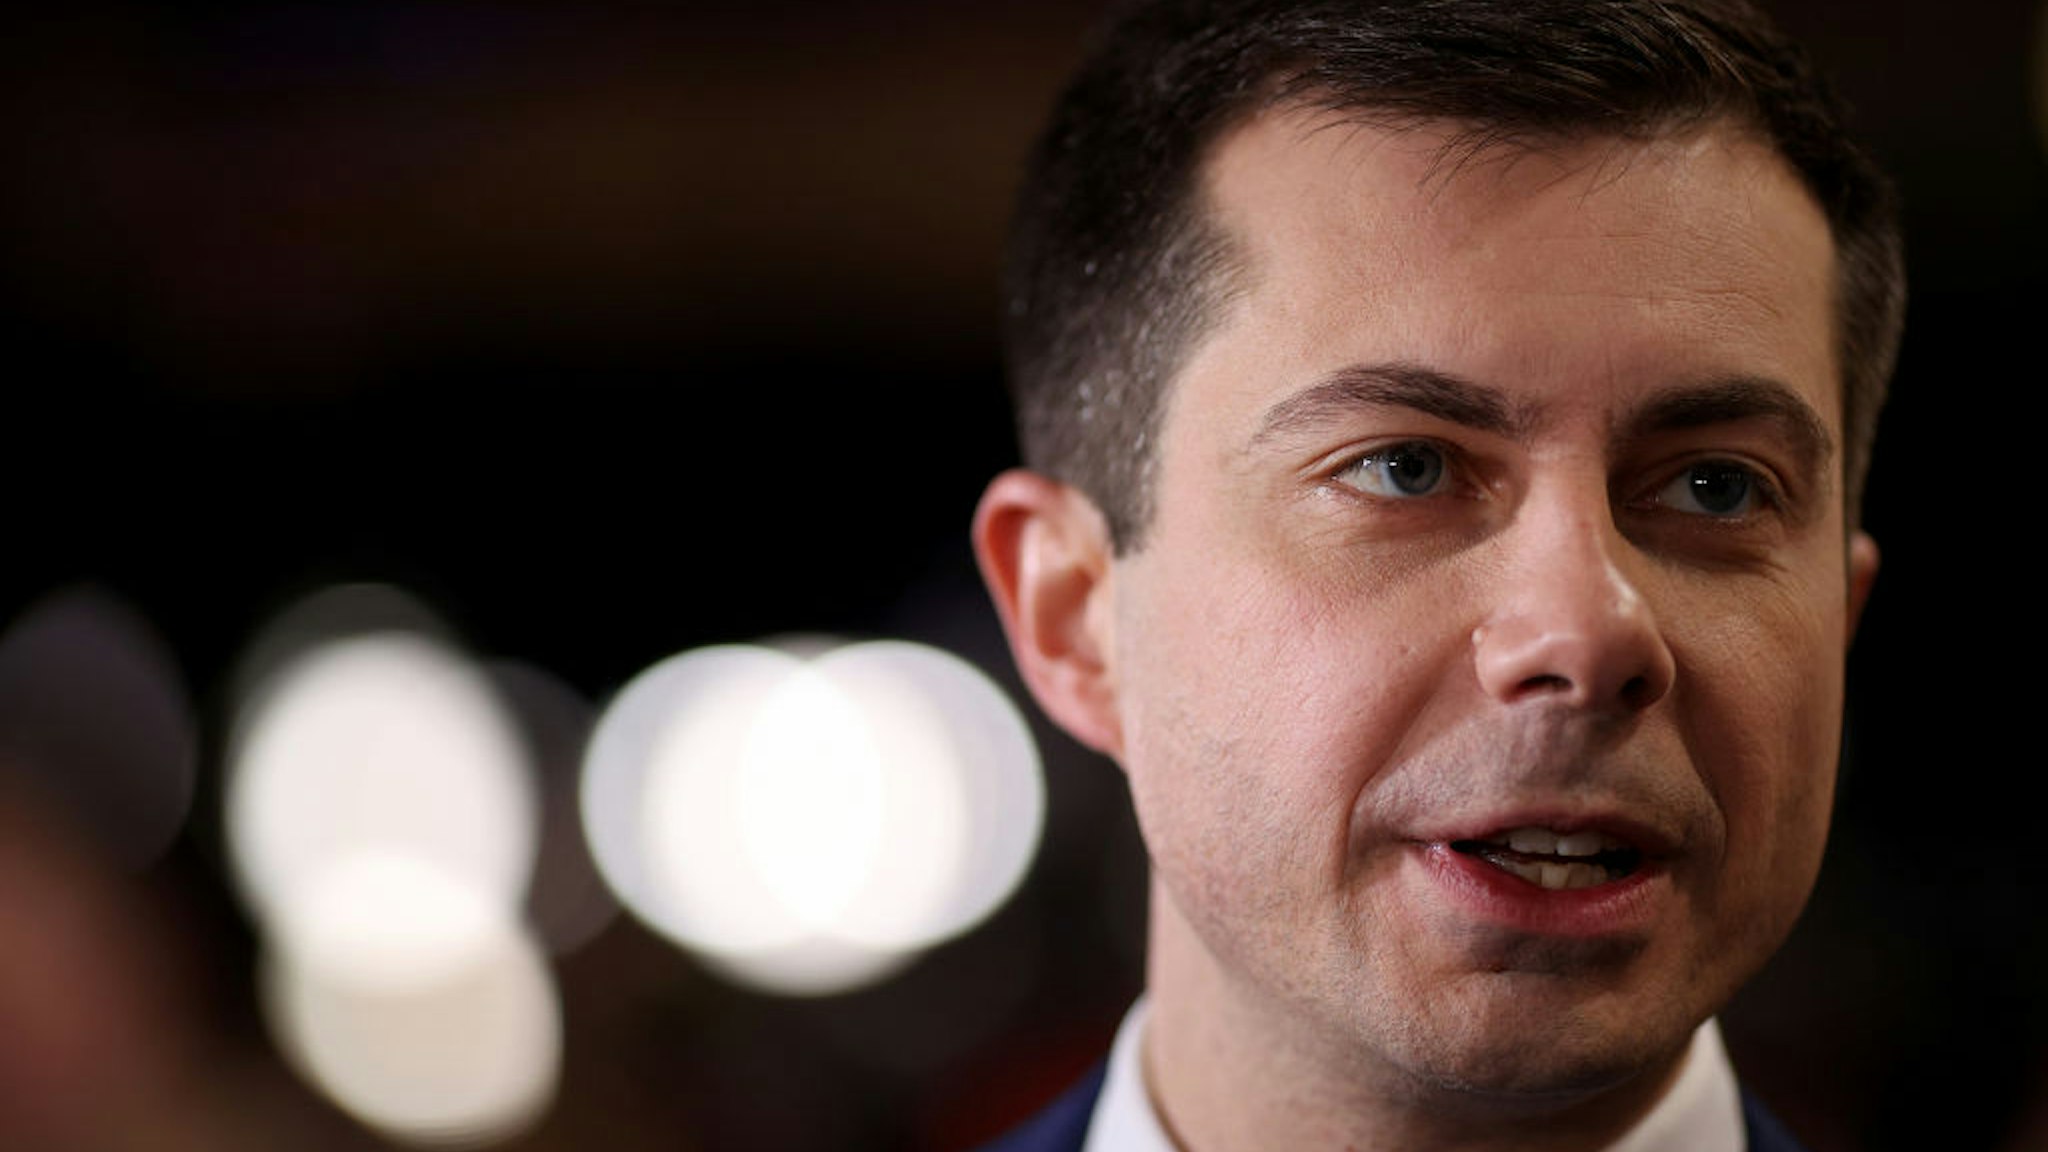 Democratic presidential candidate former South Bend, Indiana Mayor Pete Buttigieg speaks to reporters in the spin room after the Democratic presidential primary debate at St. Anselm College on February 07, 2020 in Manchester, New Hampshire.